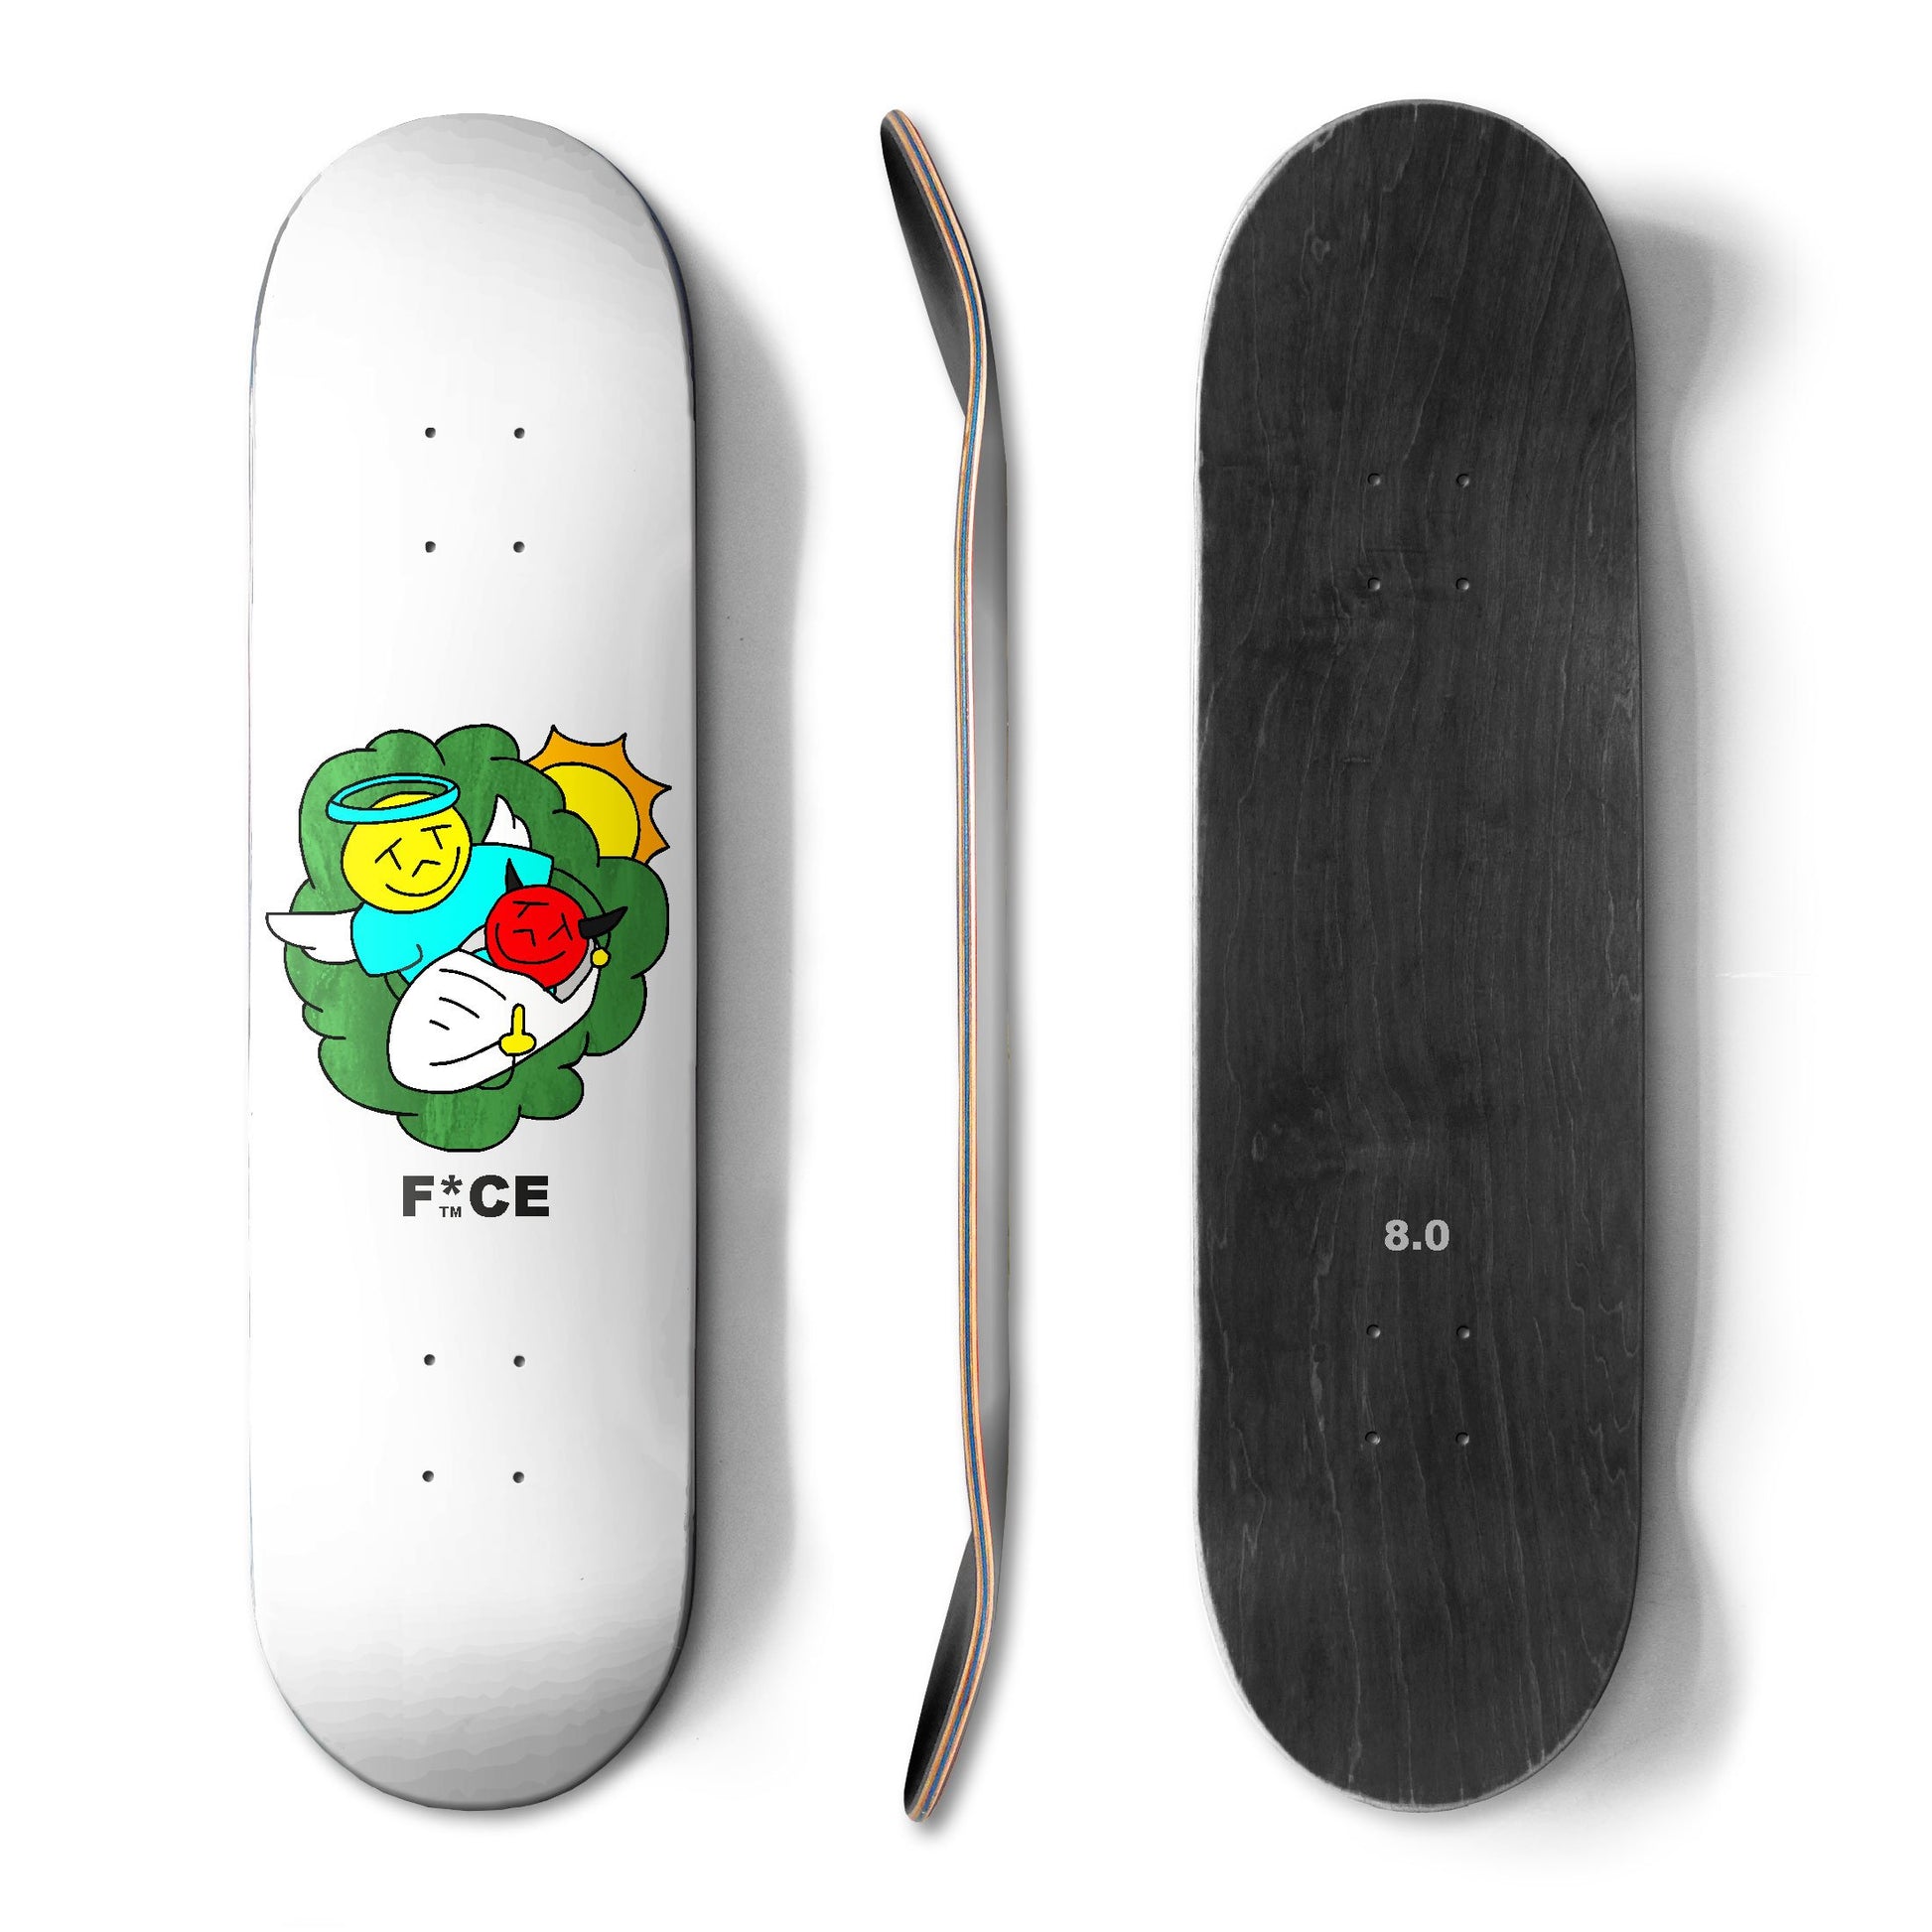 F*CE Angel Team Deck (Assorted Colors)